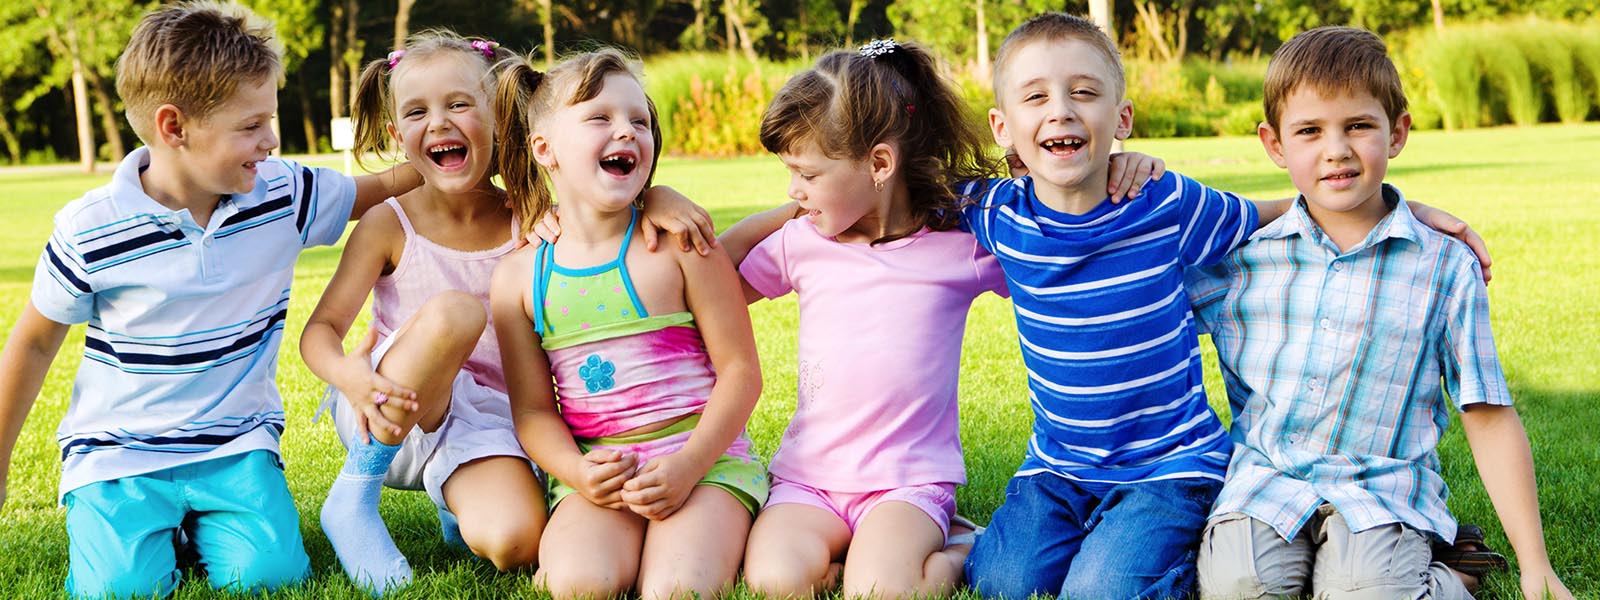 Kids sitting on the grass and smiling